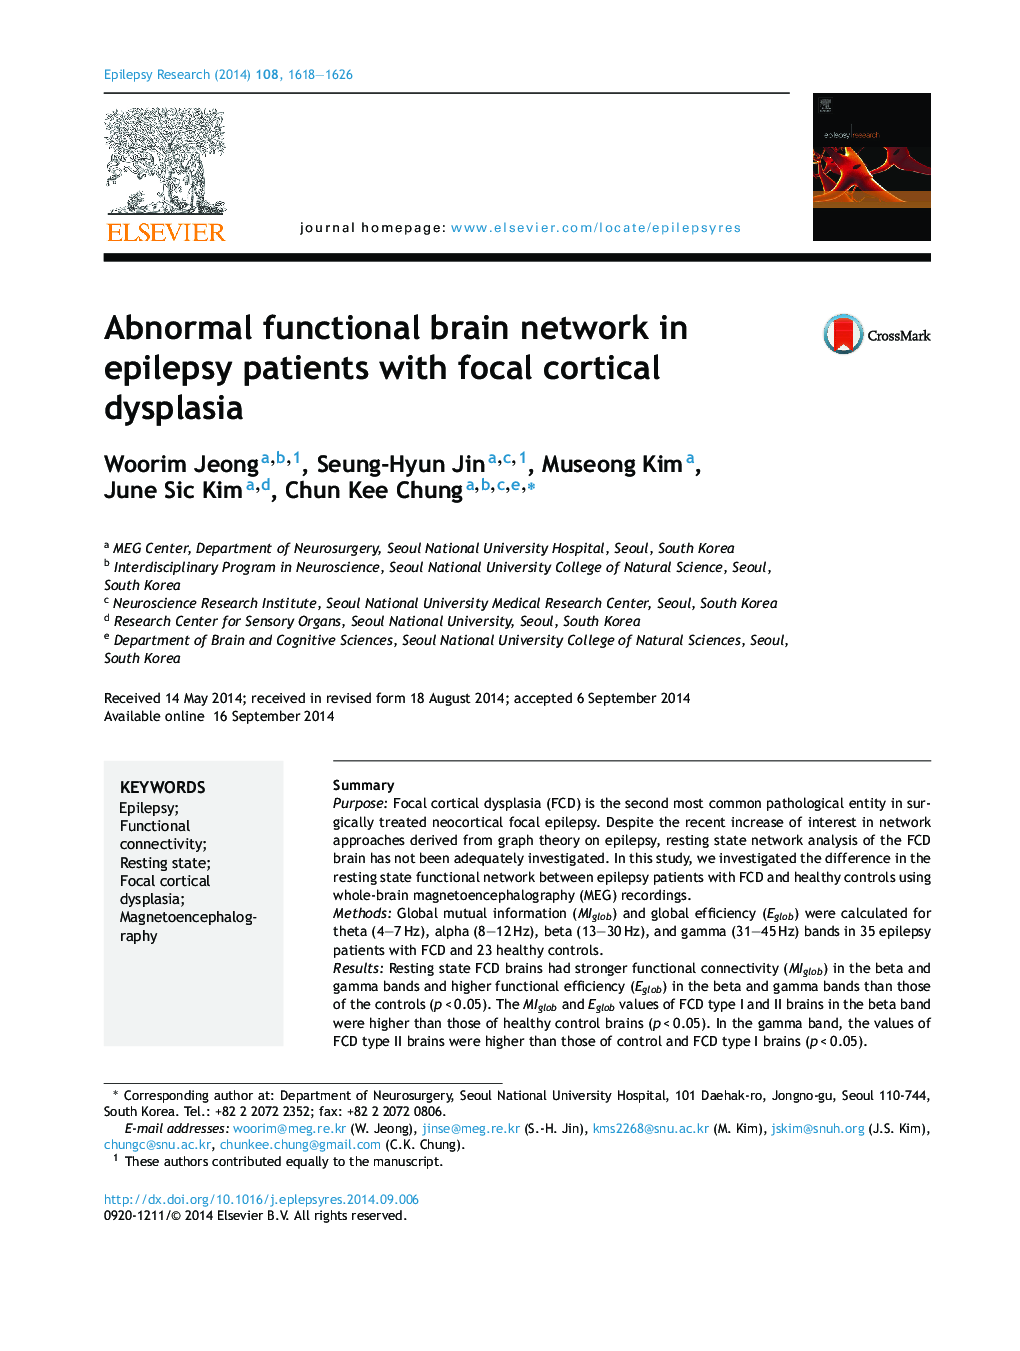 Abnormal functional brain network in epilepsy patients with focal cortical dysplasia